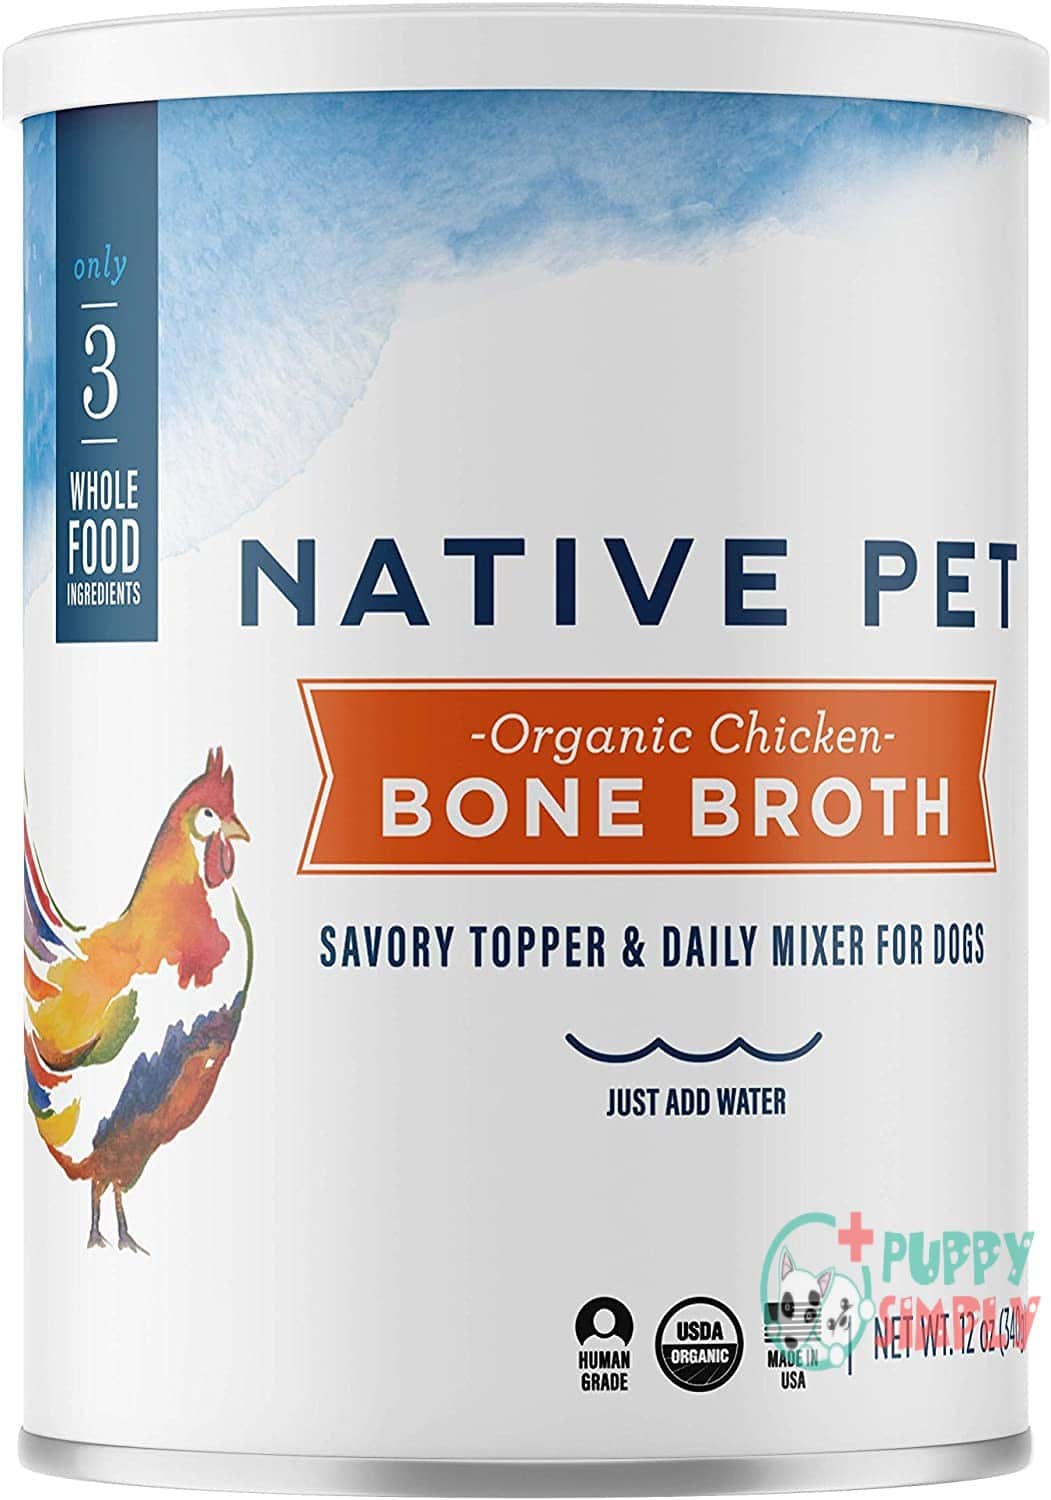 Native Pet’s Powdered Bone Broth for Dogs